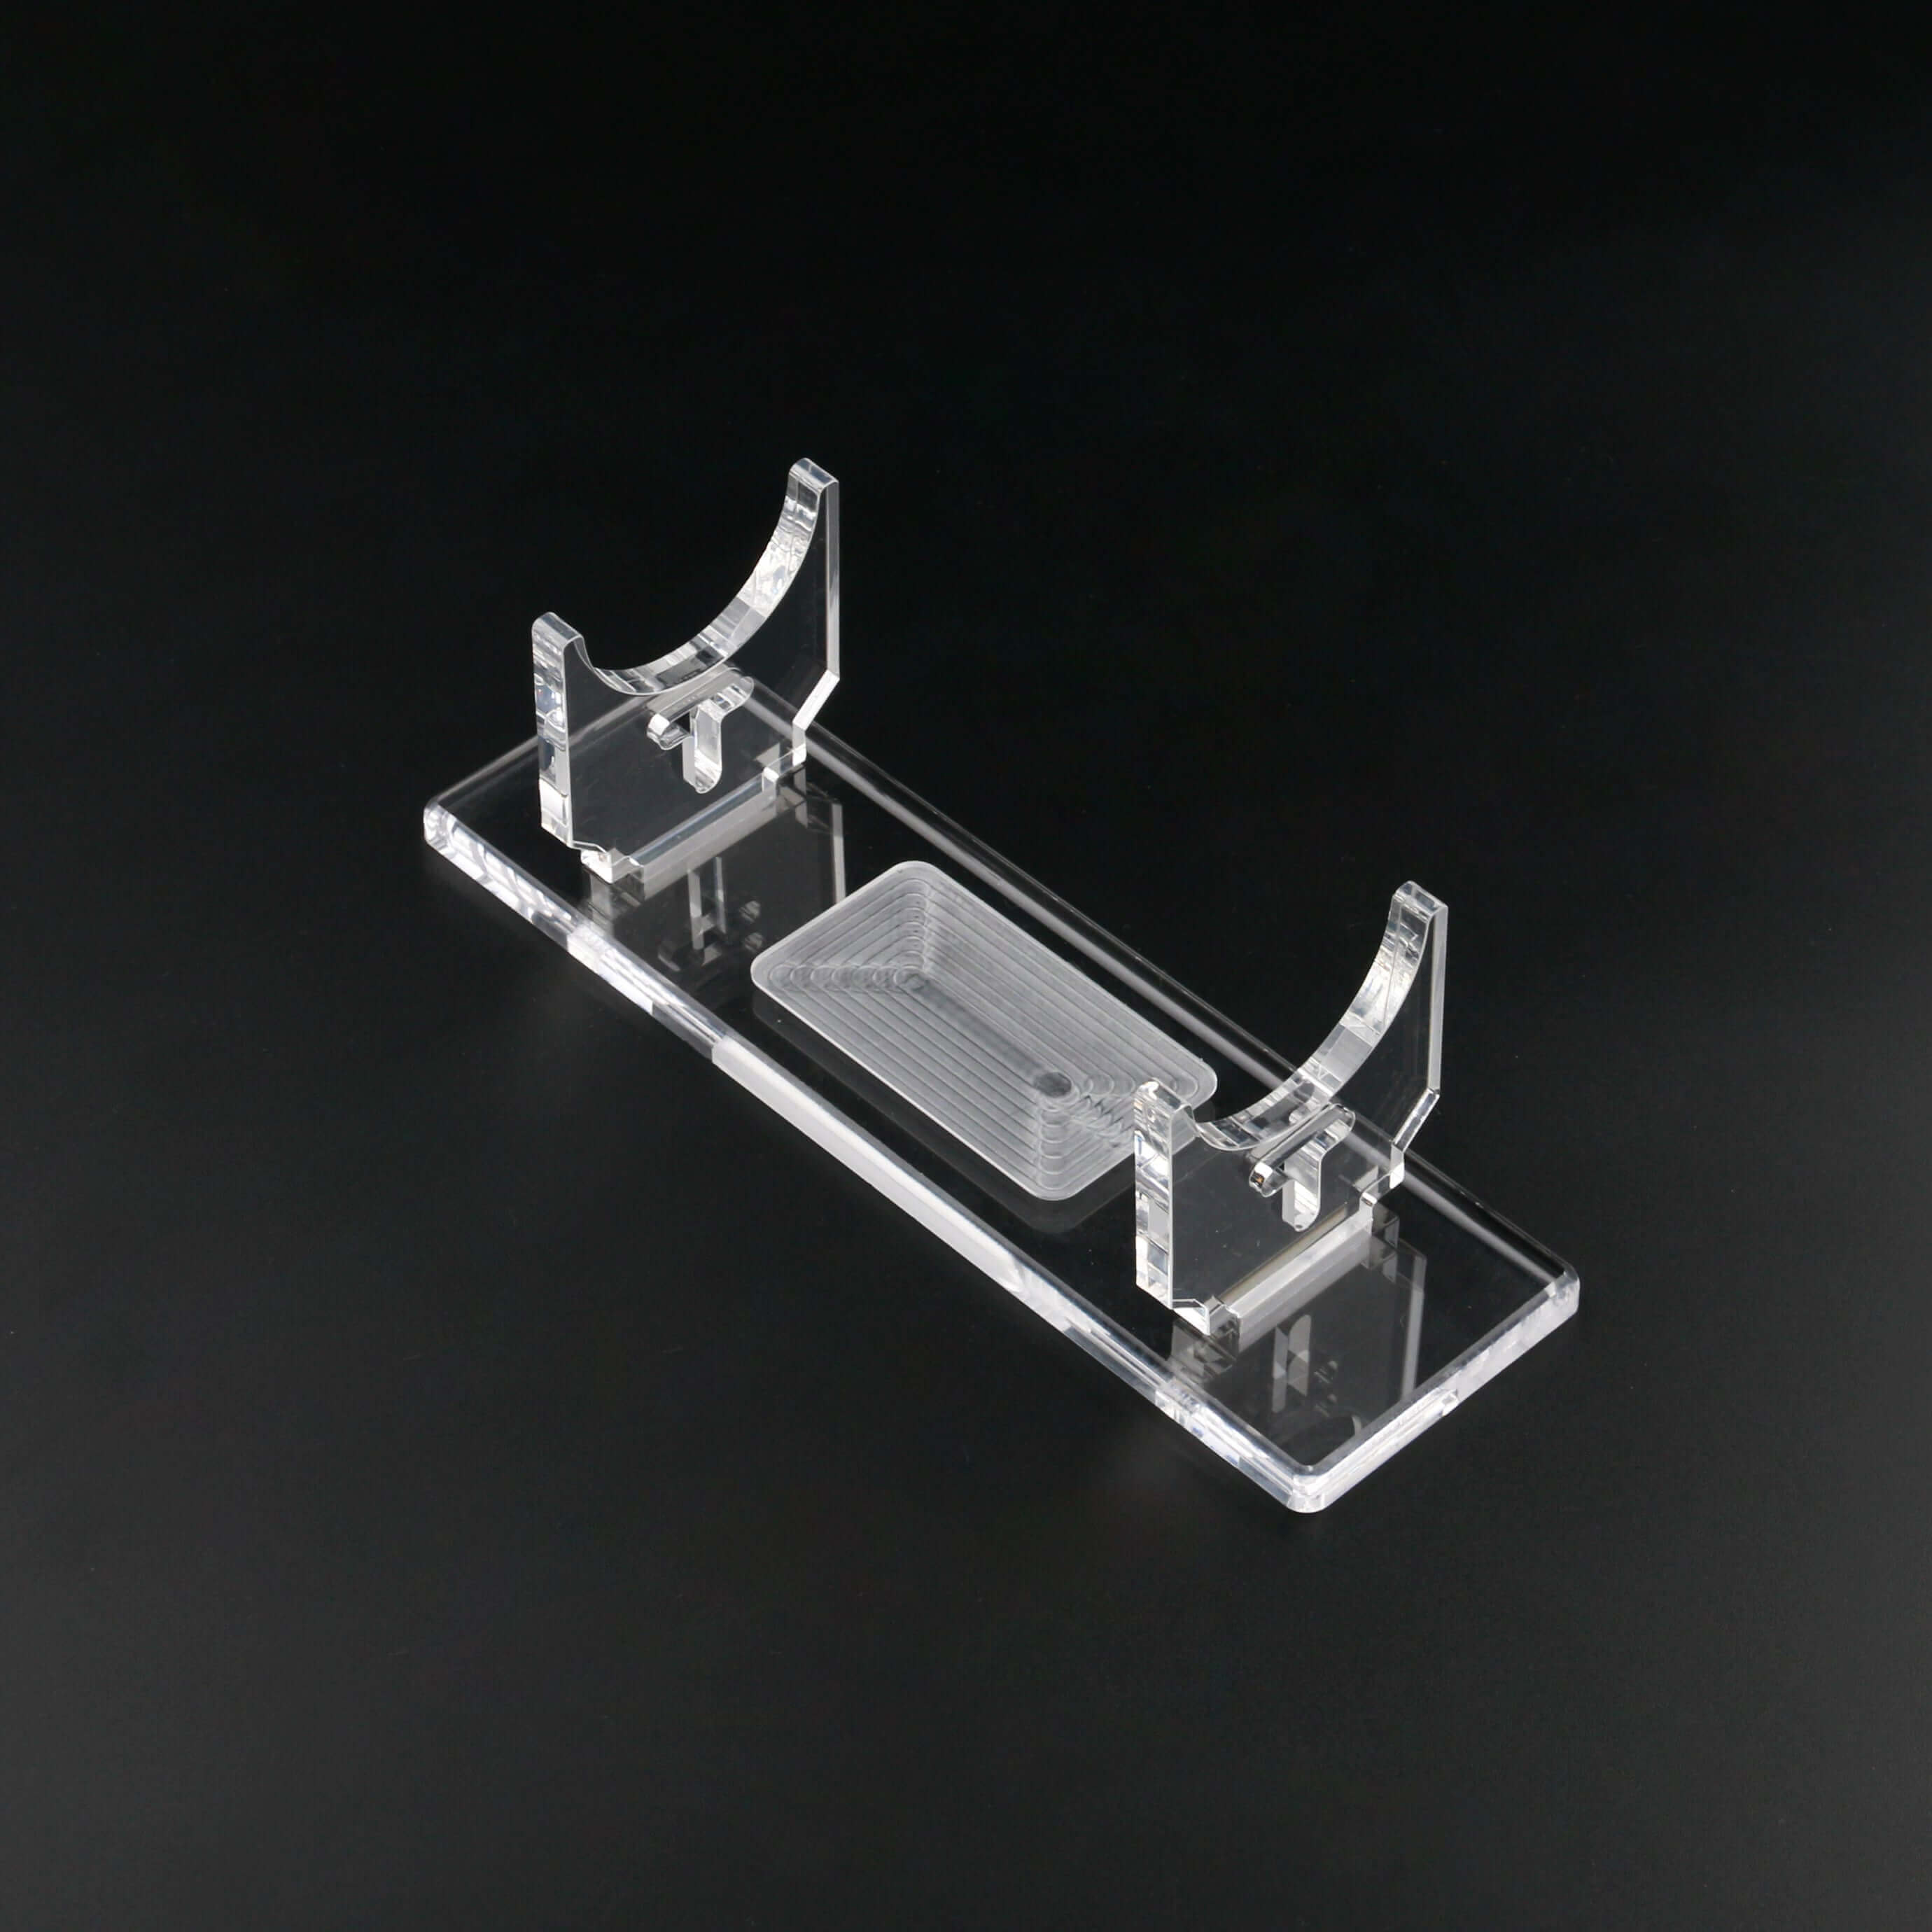 Clear Acrylic Lightsaber Stand: Showcase Your Saber in Style